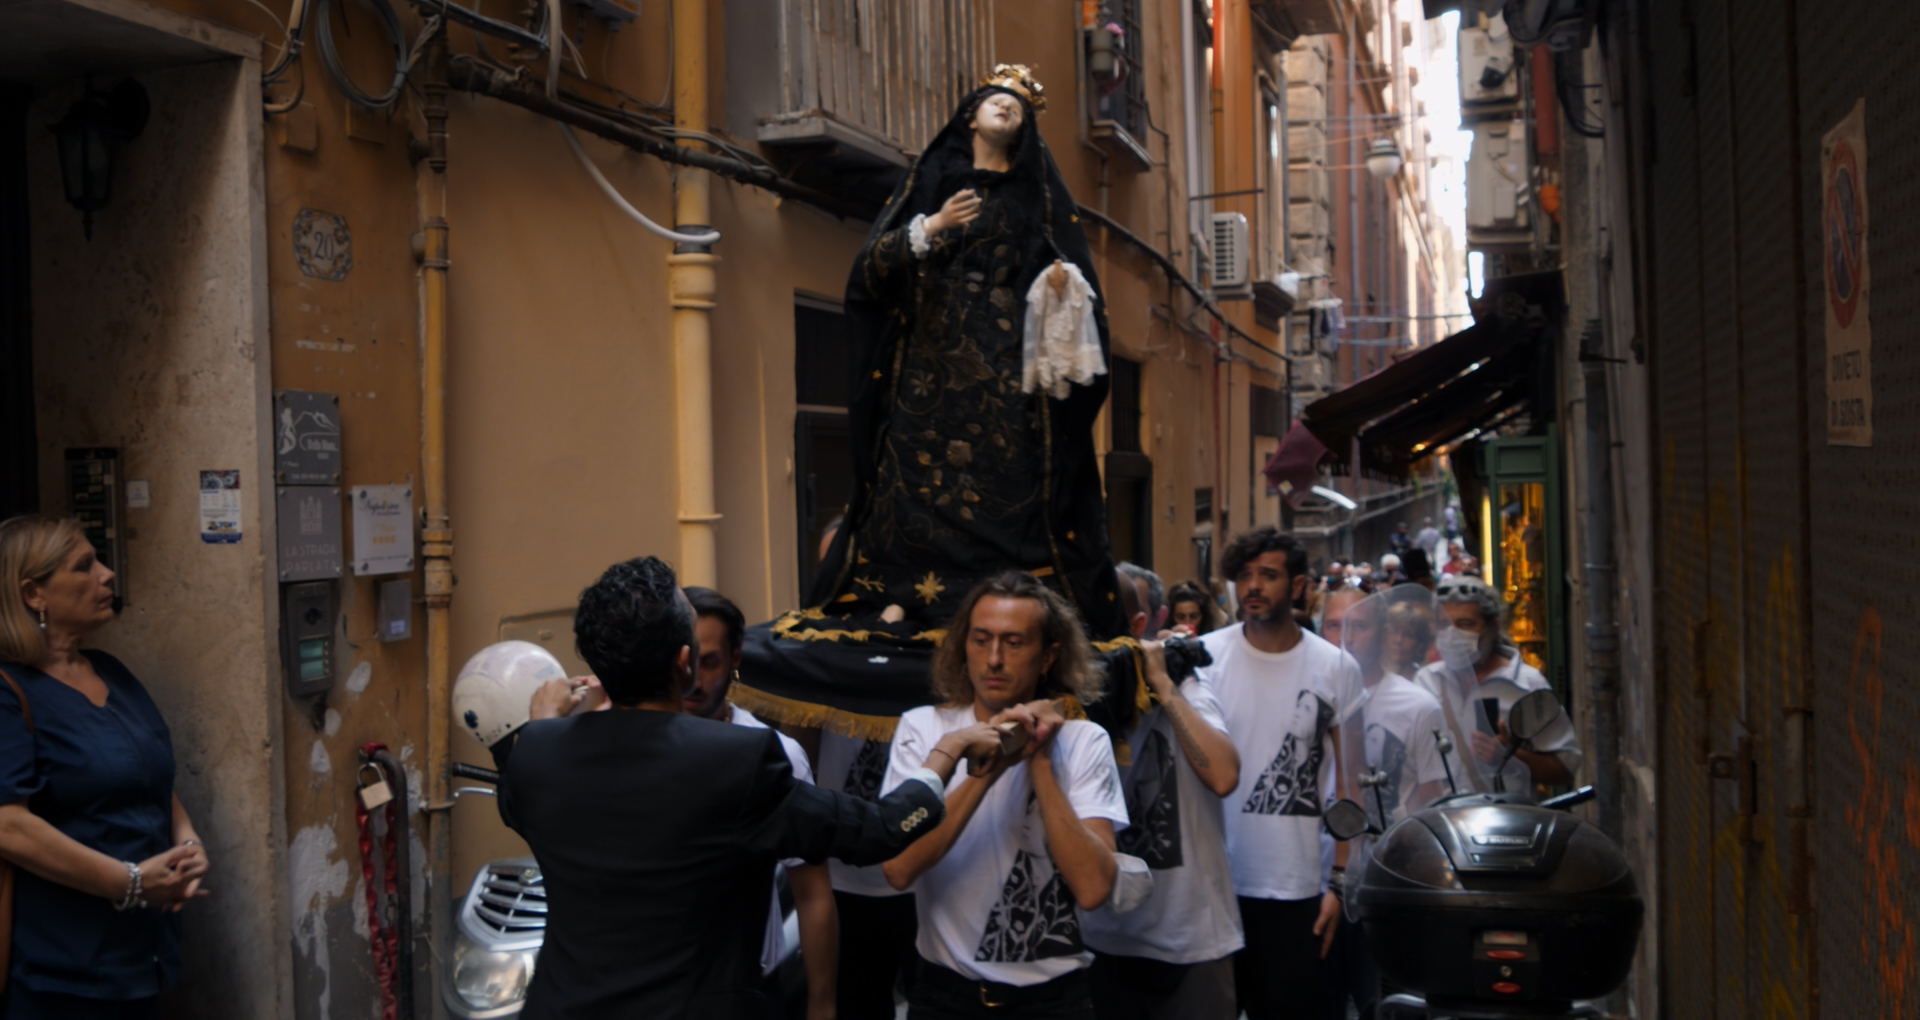 A frame from the film “The Gospel According to Ciretta,” showing a narrow street in Naples through which a procession of men in white T-shirts is passing, carrying a statue of Mary.